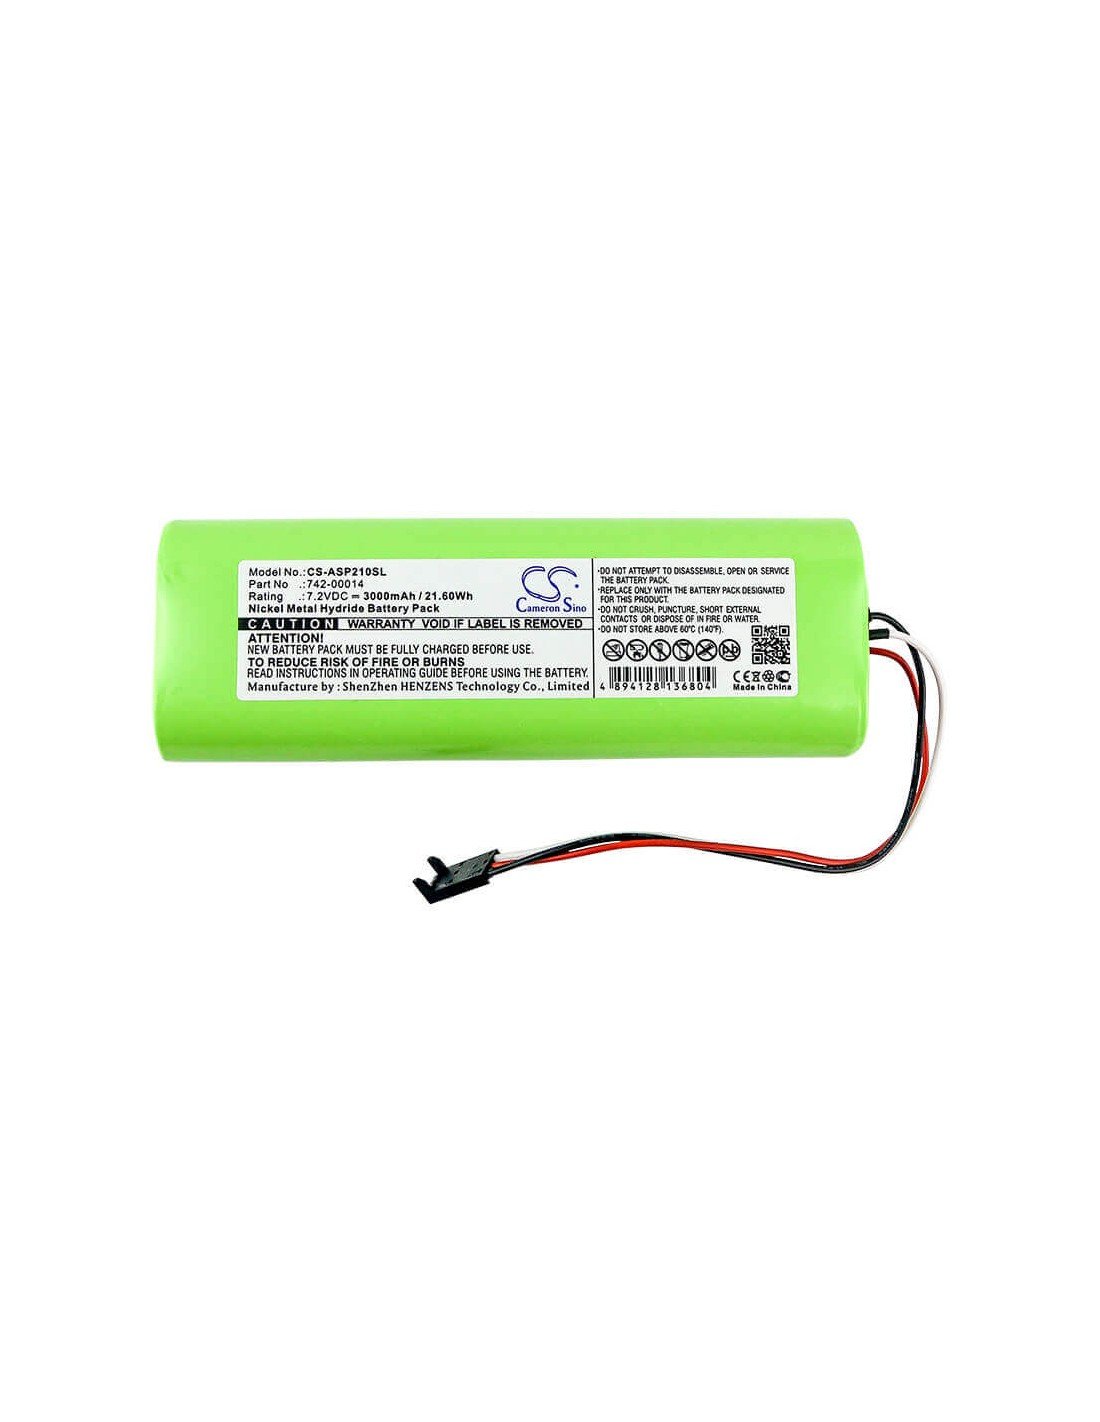 Battery for Applied Instruments, Super Buddy, Super Buddy 21, Super Buddy 29 7.2V, 3000mAh - 21.60Wh